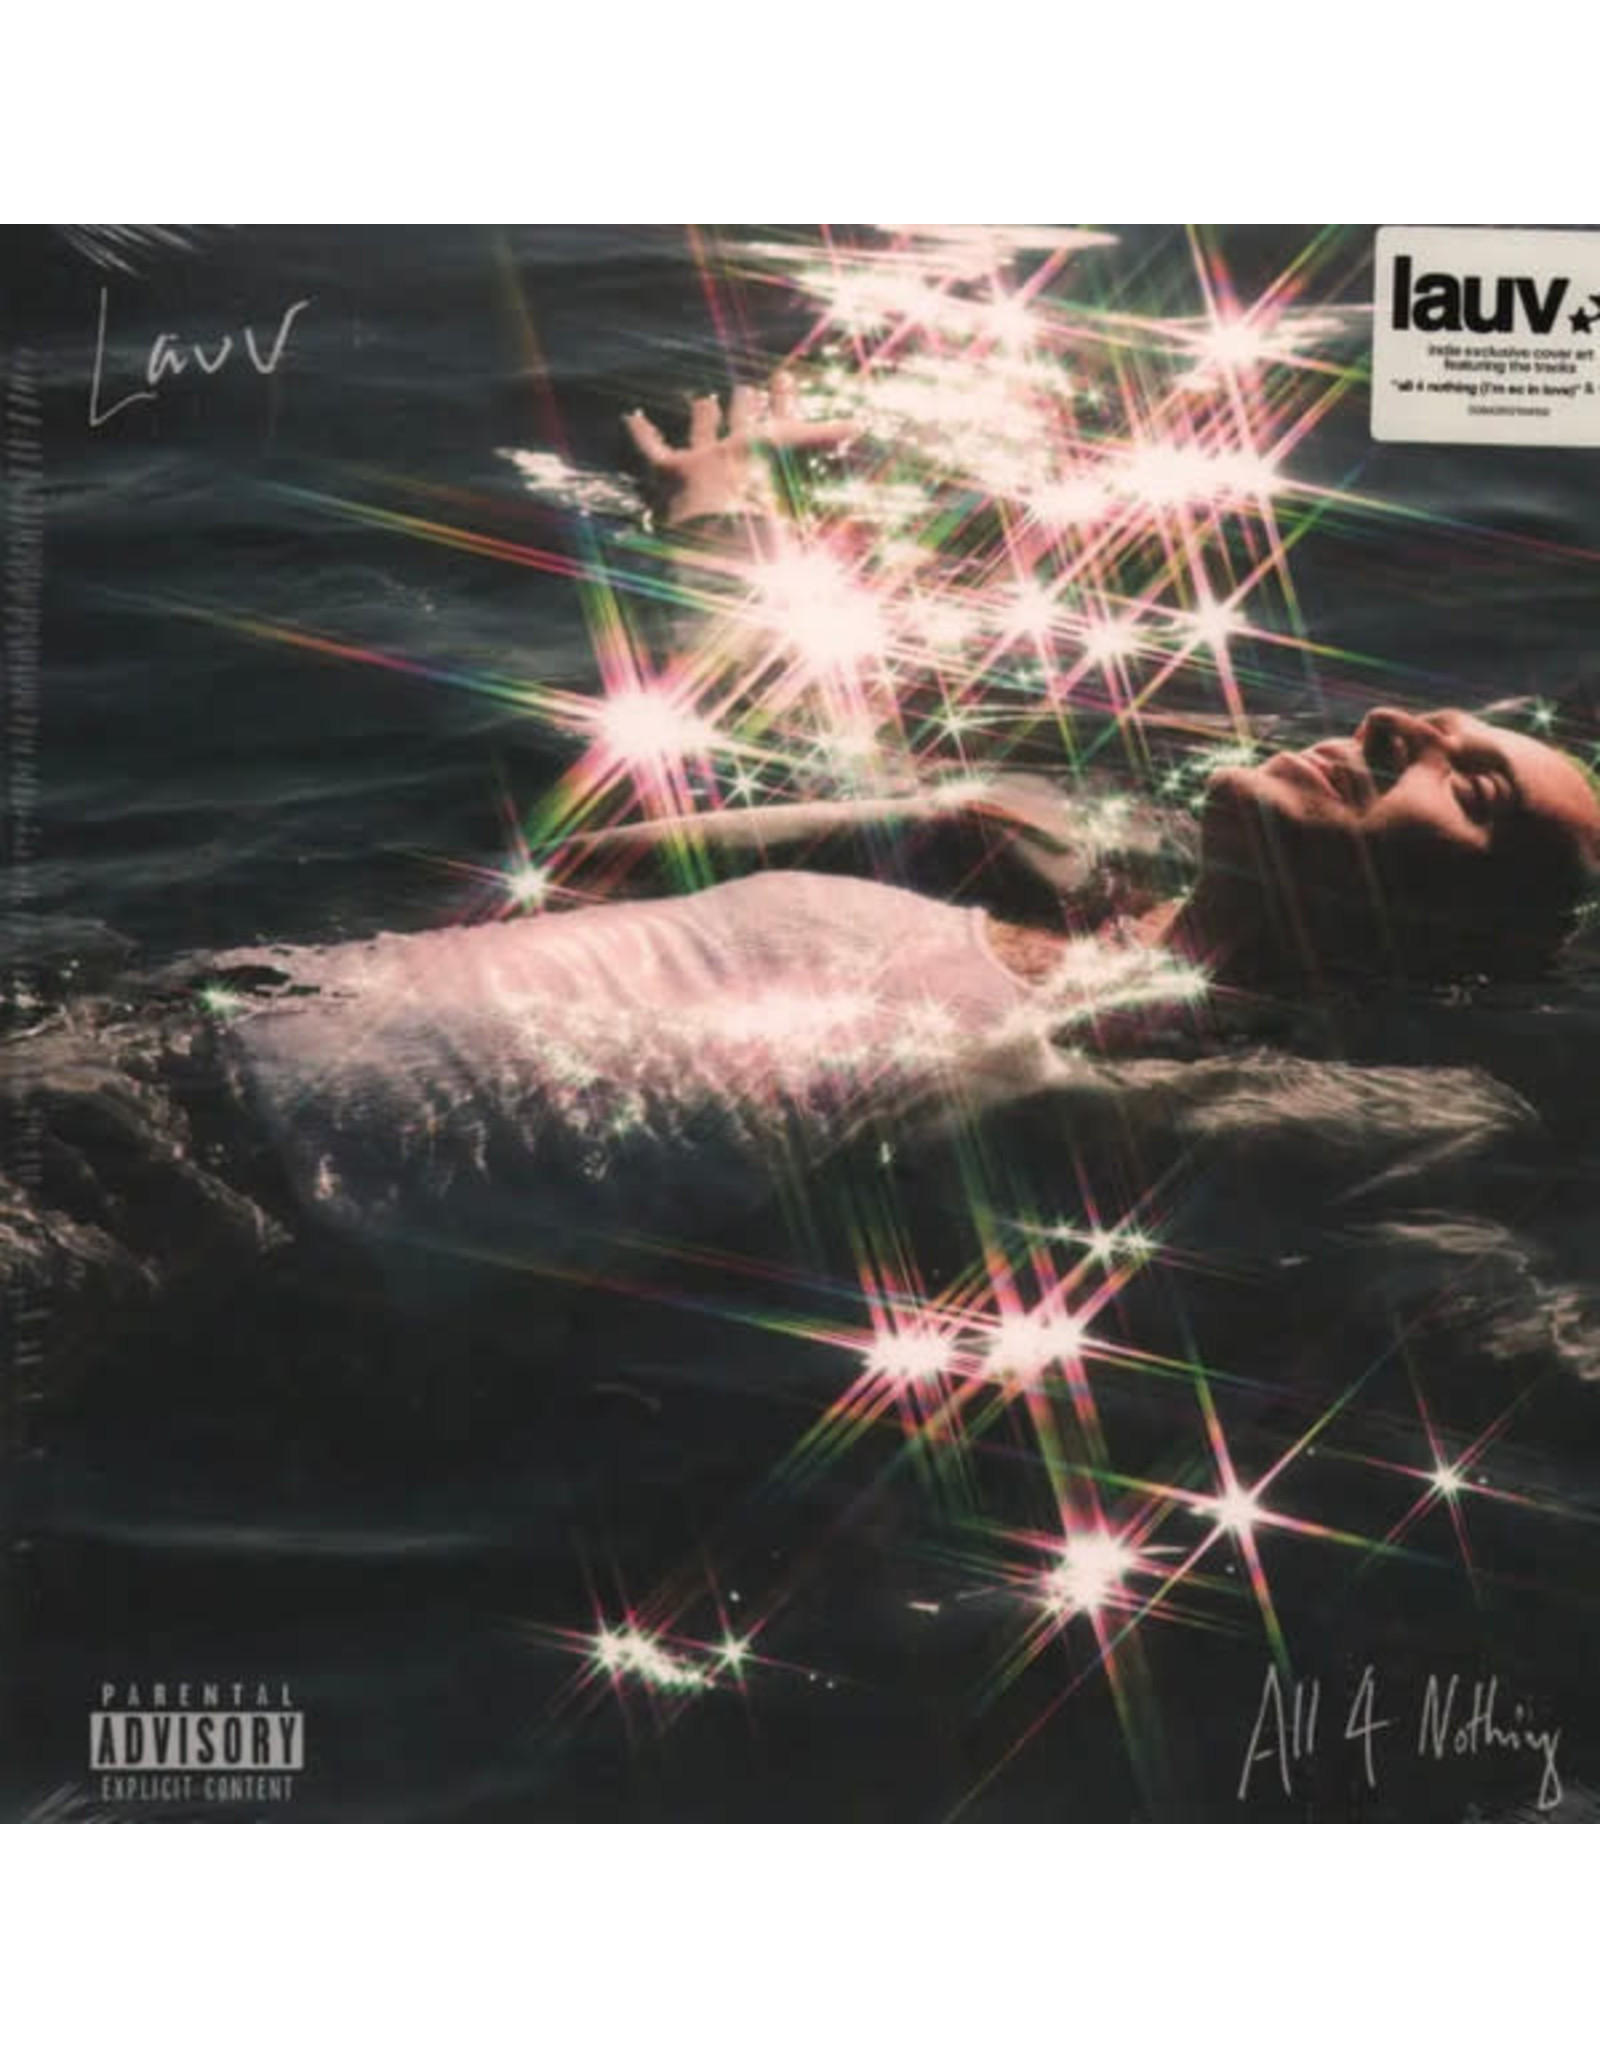 New Vinyl Lauv - All For Nothing (IEX) LP